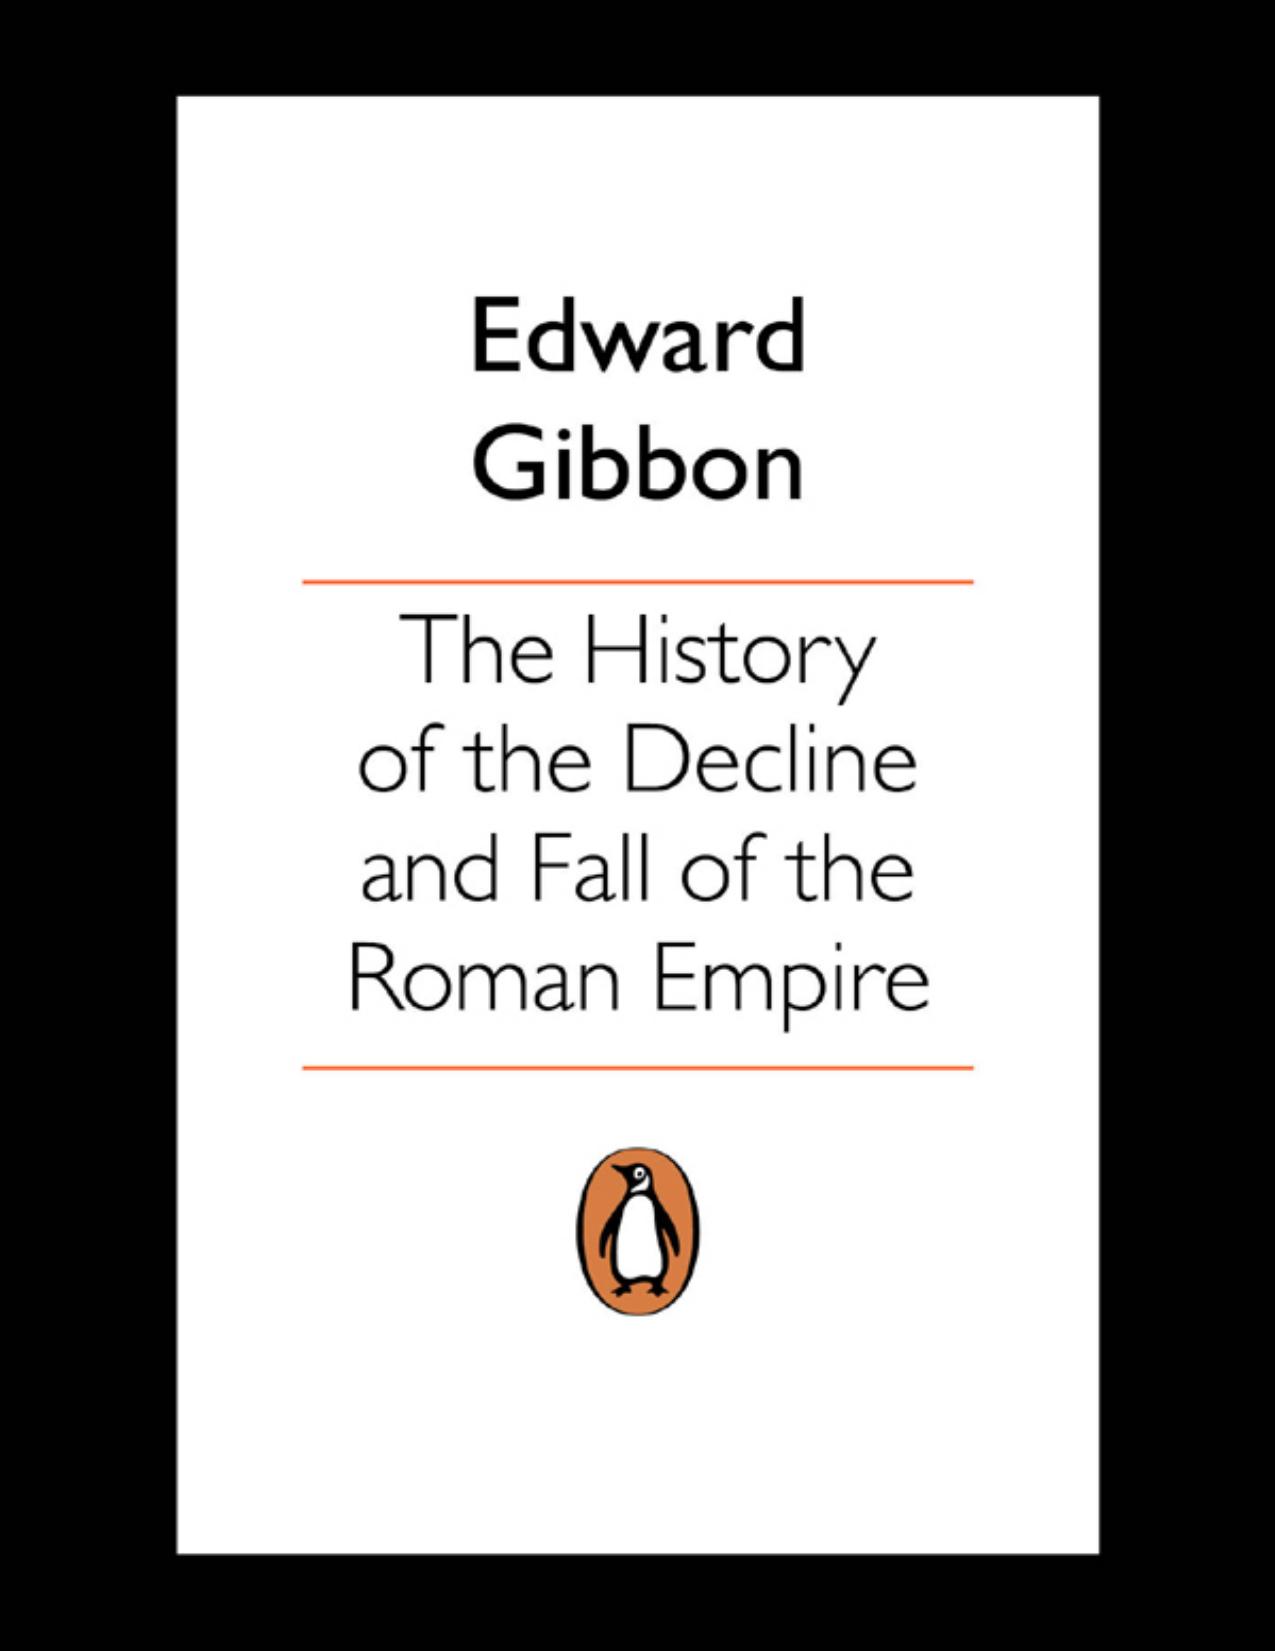 The History of the Decline and Fall of the Roman Empire by David Womersley